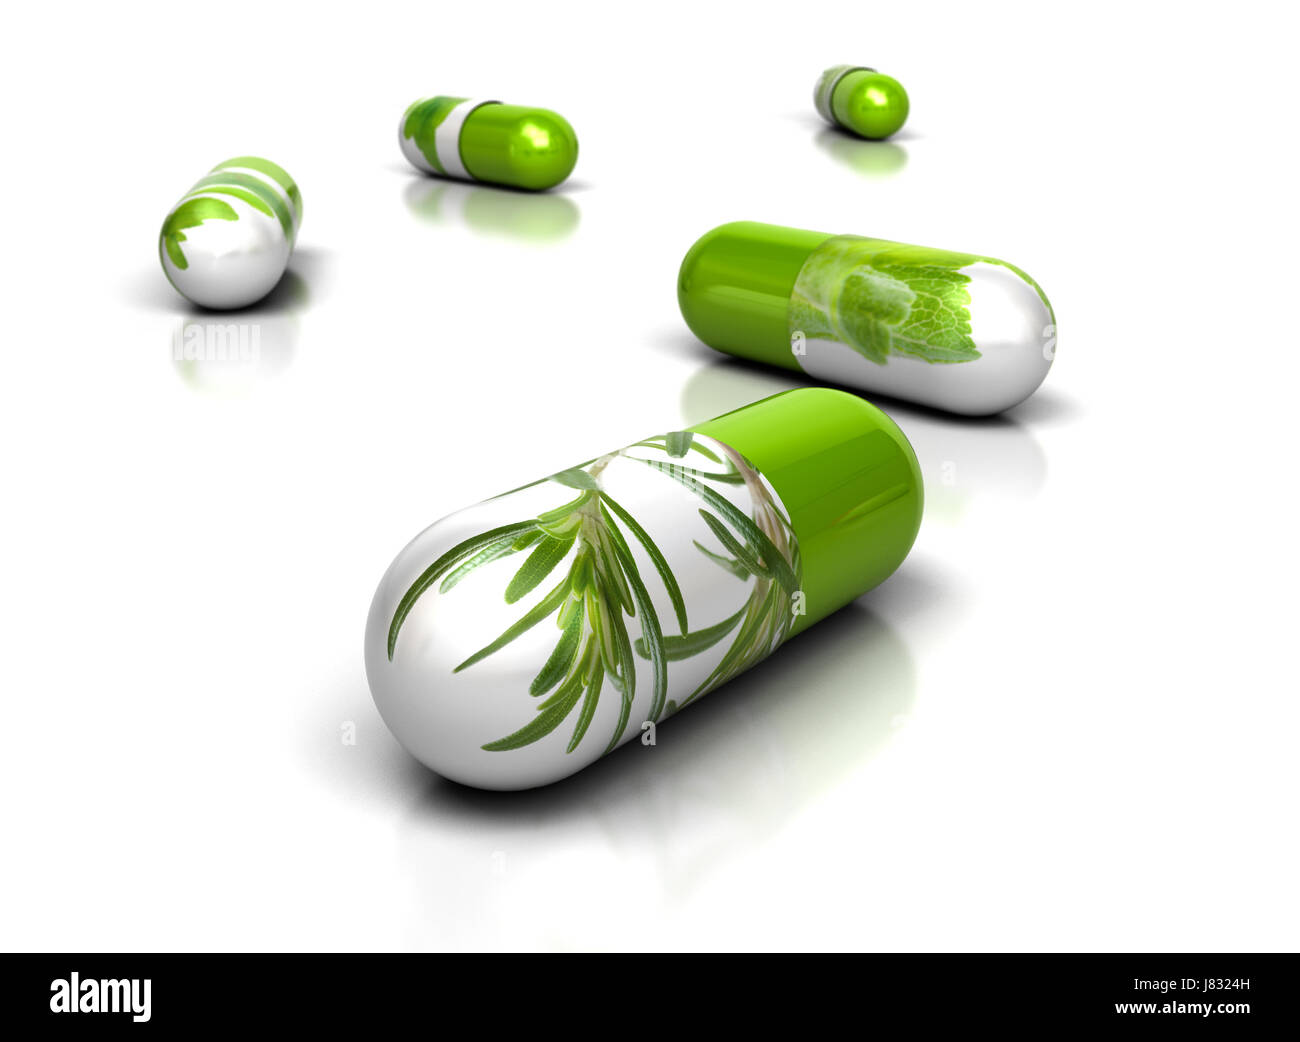 health sweet isolated medicinally medical model design project concept plan Stock Photo